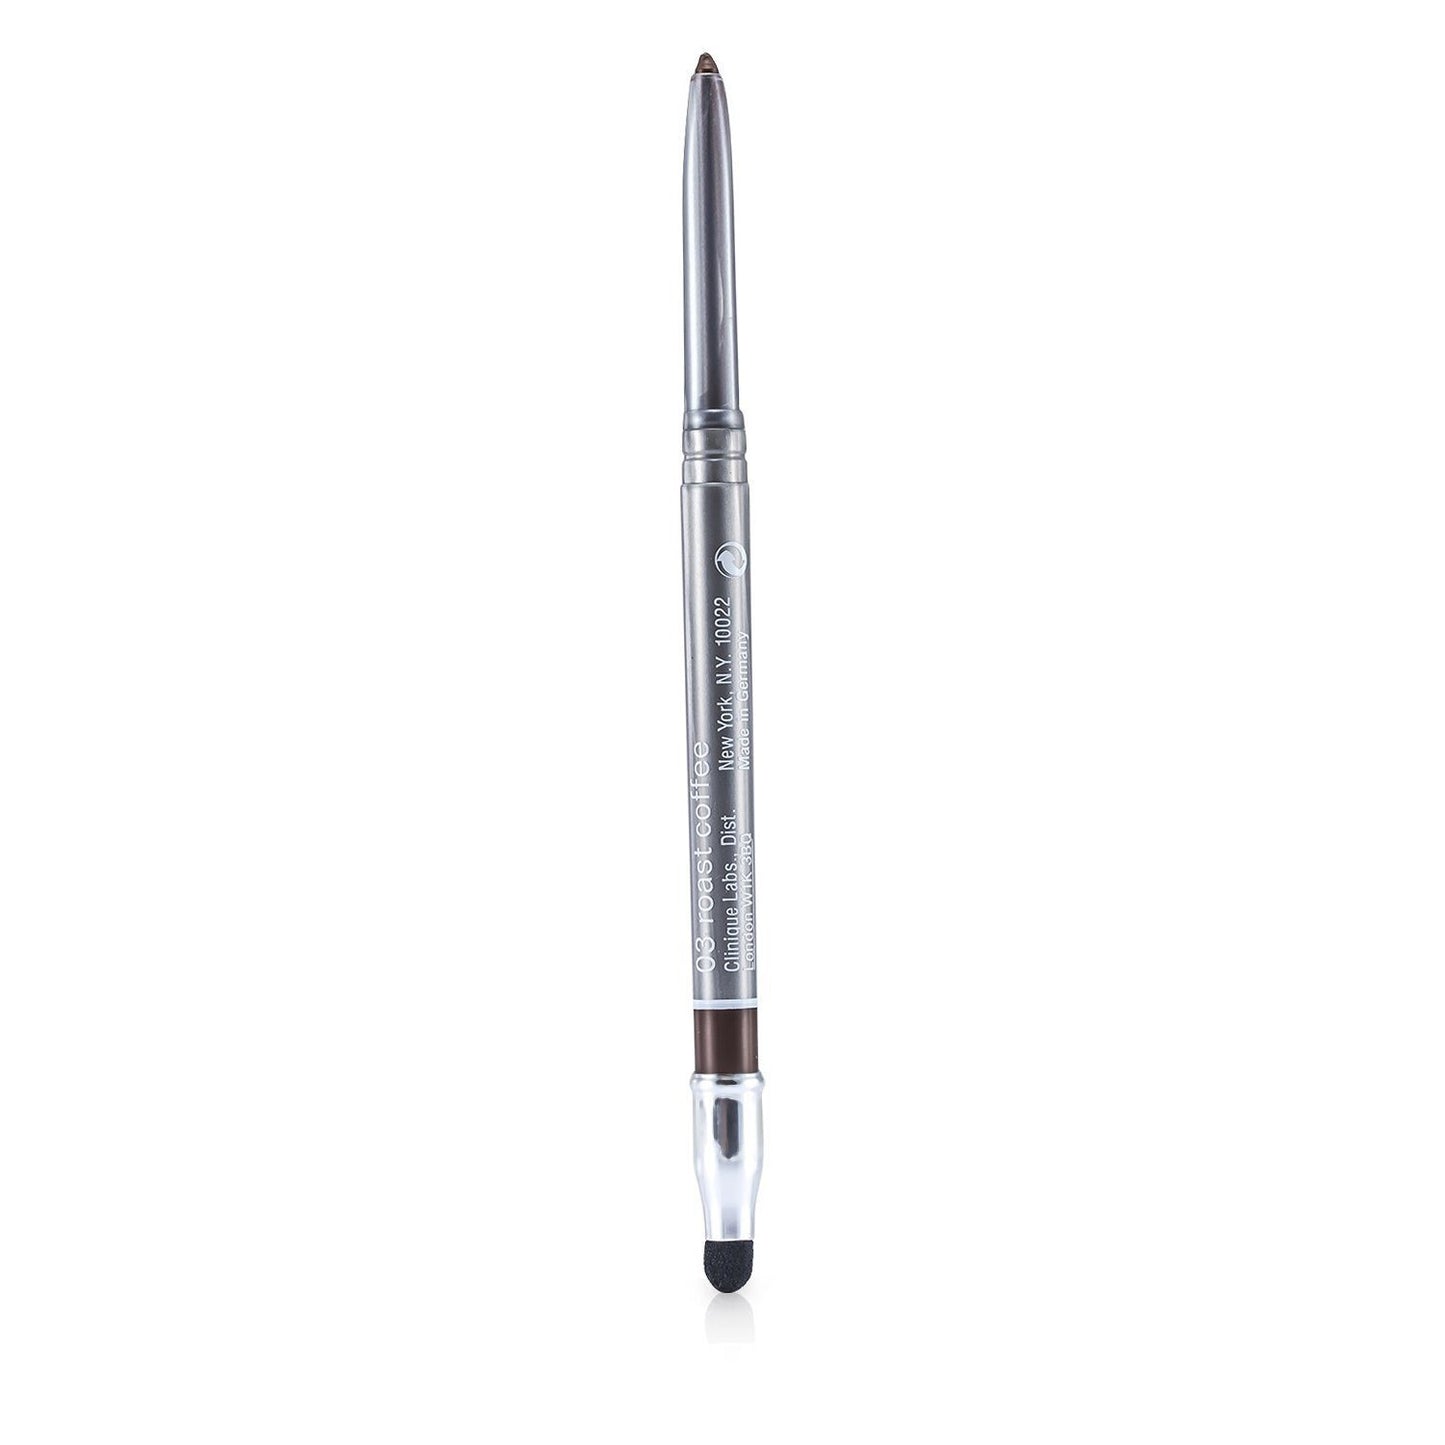 CLINIQUE - Quickliner For Eyes - 03 Roast Coffee 62A4-03 0.3g/0.01oz